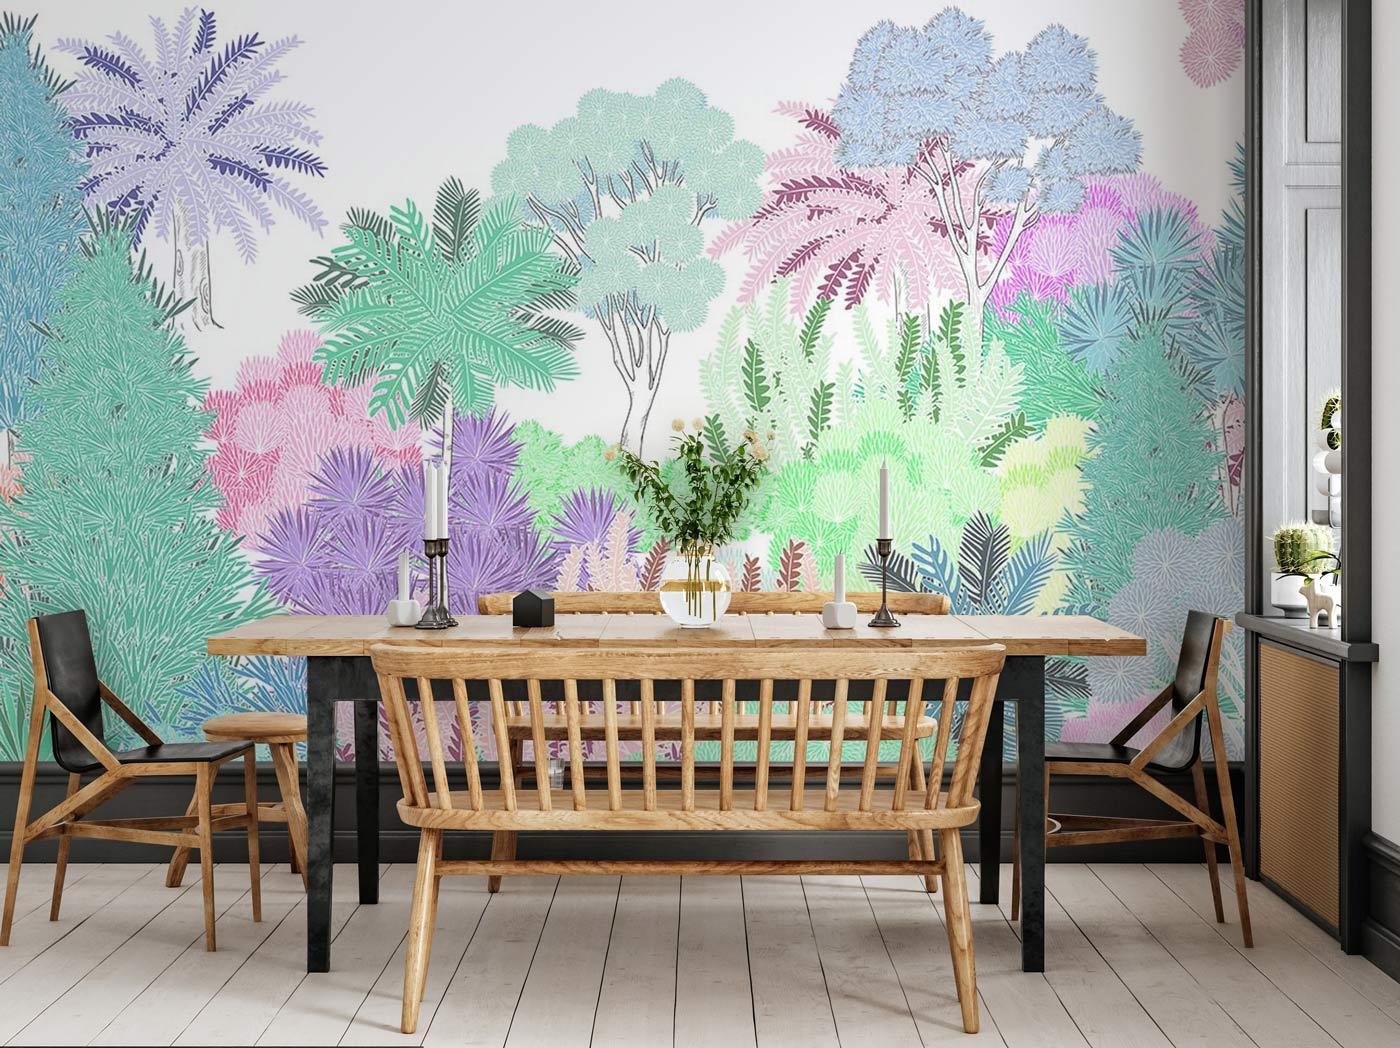 Wallpaper mural with a sketch of trees for the dining room's decor.